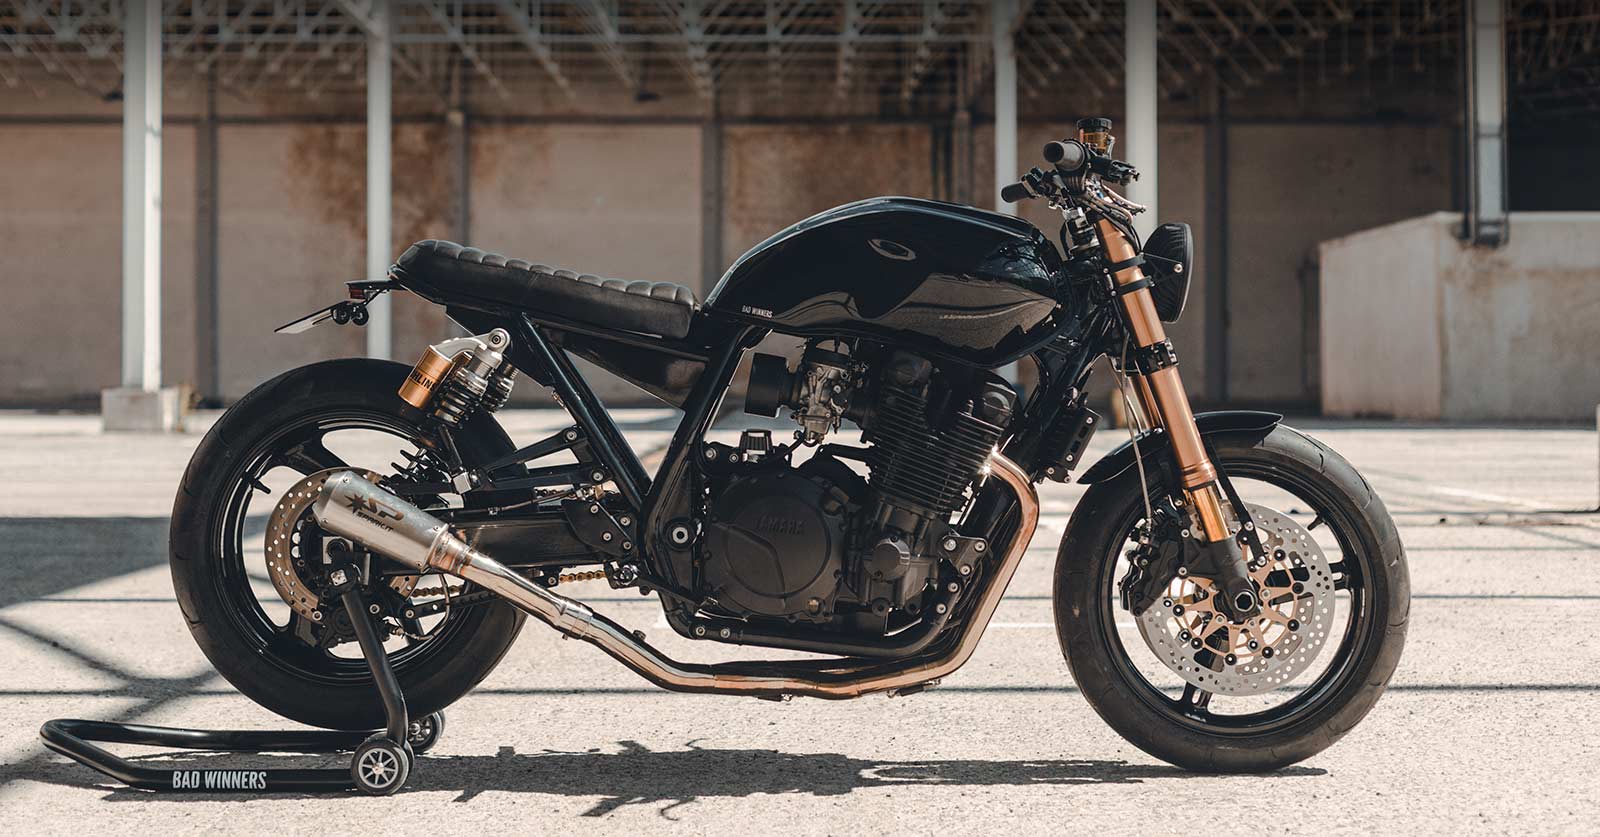 A Yamaha XJR1300 from Bad Winners 